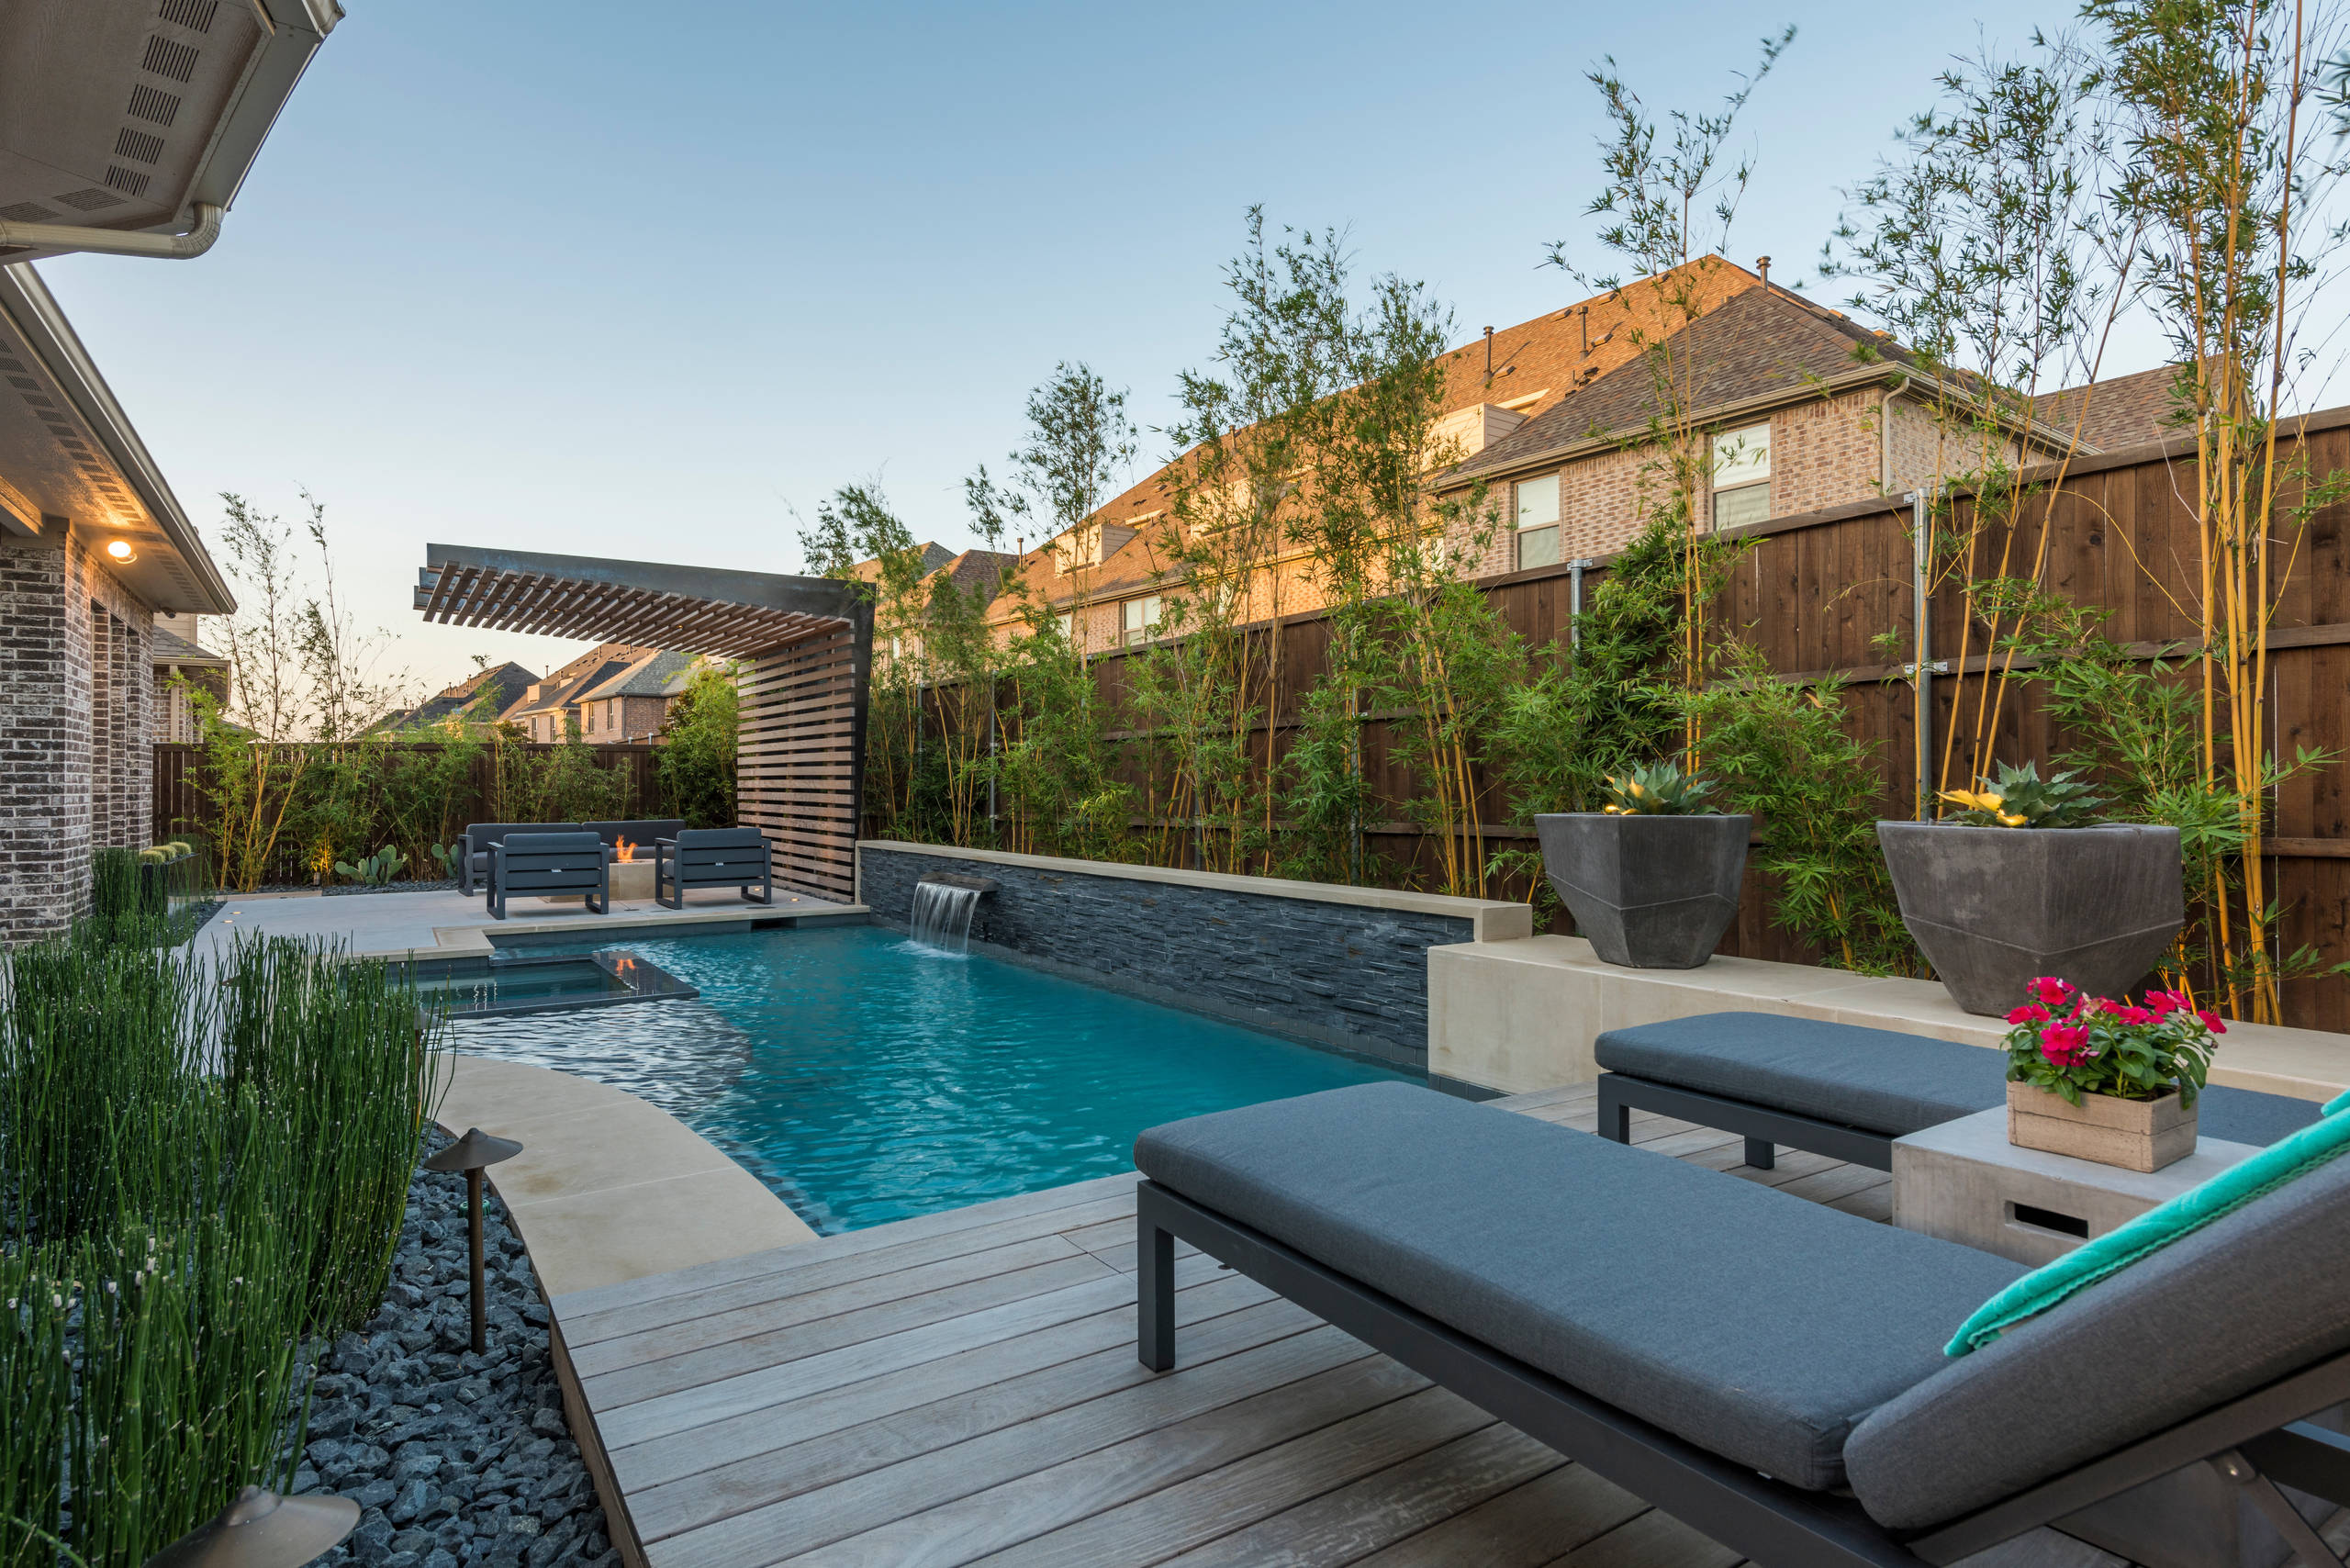 75 Pool Ideas You'Ll Love - May, 2023 | Houzz